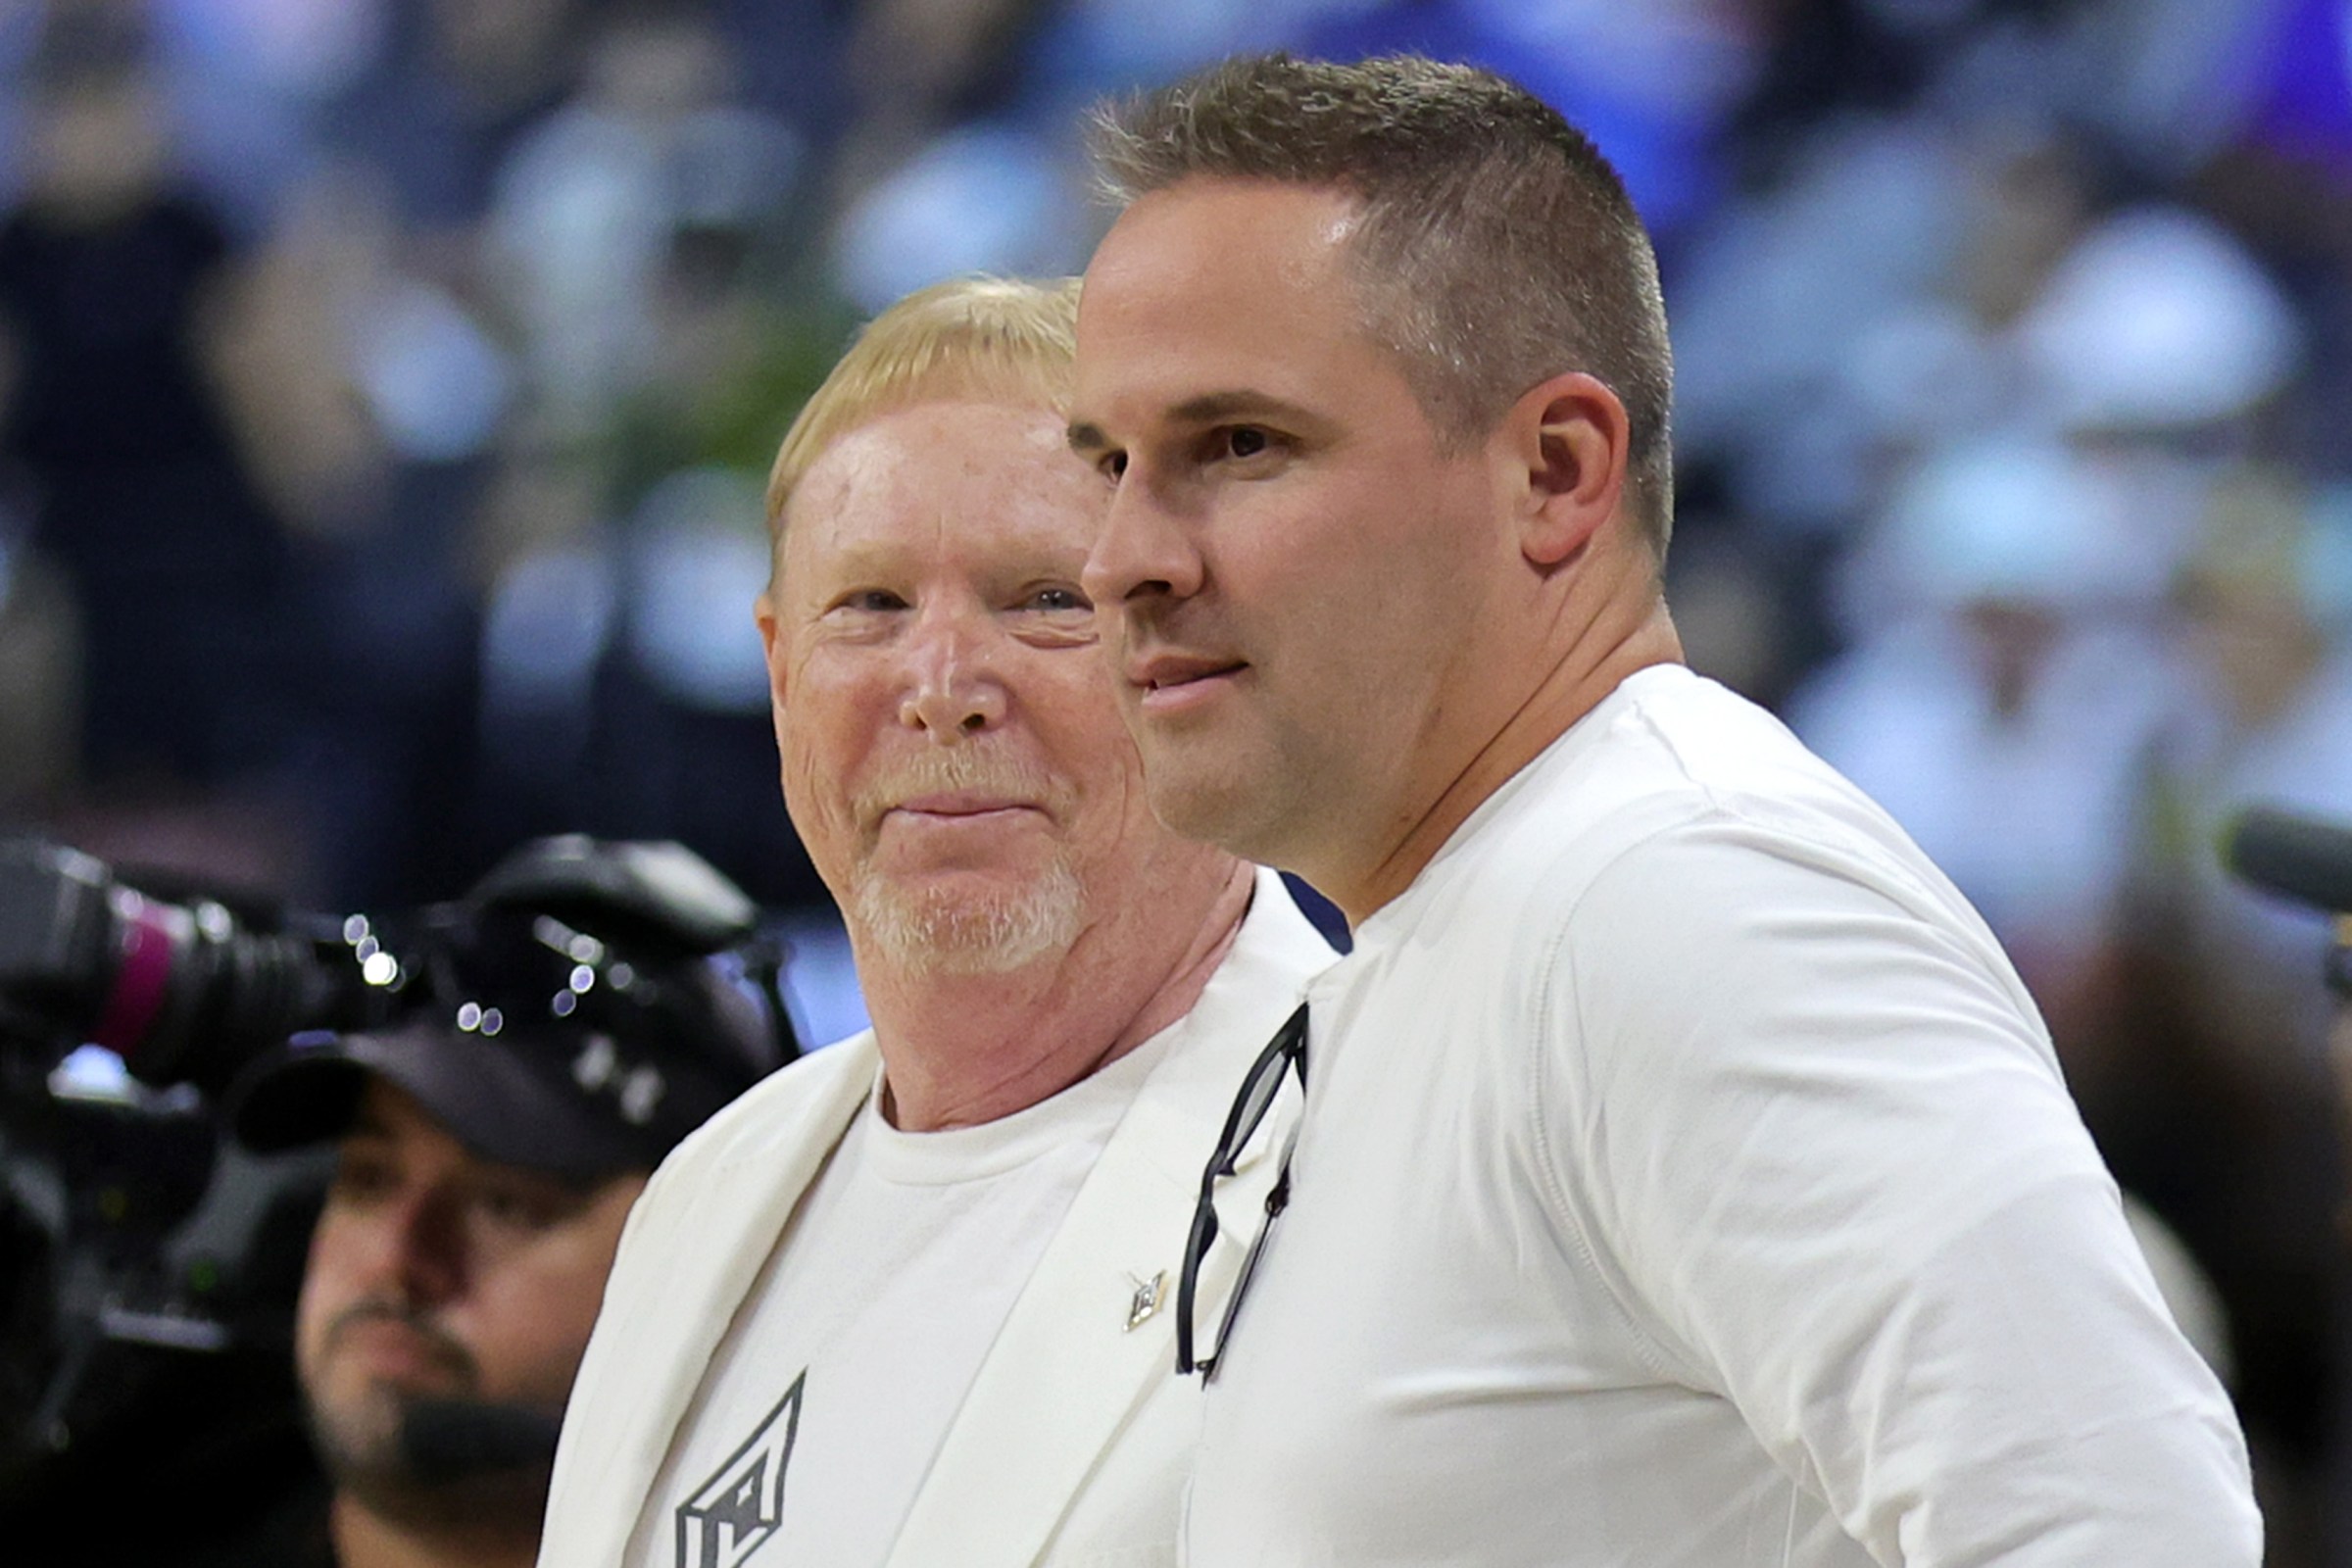 LAS VEGAS, NEVADA - AUGUST 28: Las Vegas Raiders owner and managing general partner and Las Vegas Aces owner Mark Davis (L) and head coach Josh McDaniels of the Raiders attend Game One of the 2022 WNBA Playoffs semifinals between the Aces and the Seattle Storm at Michelob ULTRA Arena on August 28, 2022 in Las Vegas, Nevada. The Storm defeated the Aces 76-73. NOTE TO USER: User expressly acknowledges and agrees that, by downloading and or using this photograph, User is consenting to the terms and conditions of the Getty Images License Agreement. (Photo by Ethan Miller/Getty Images)